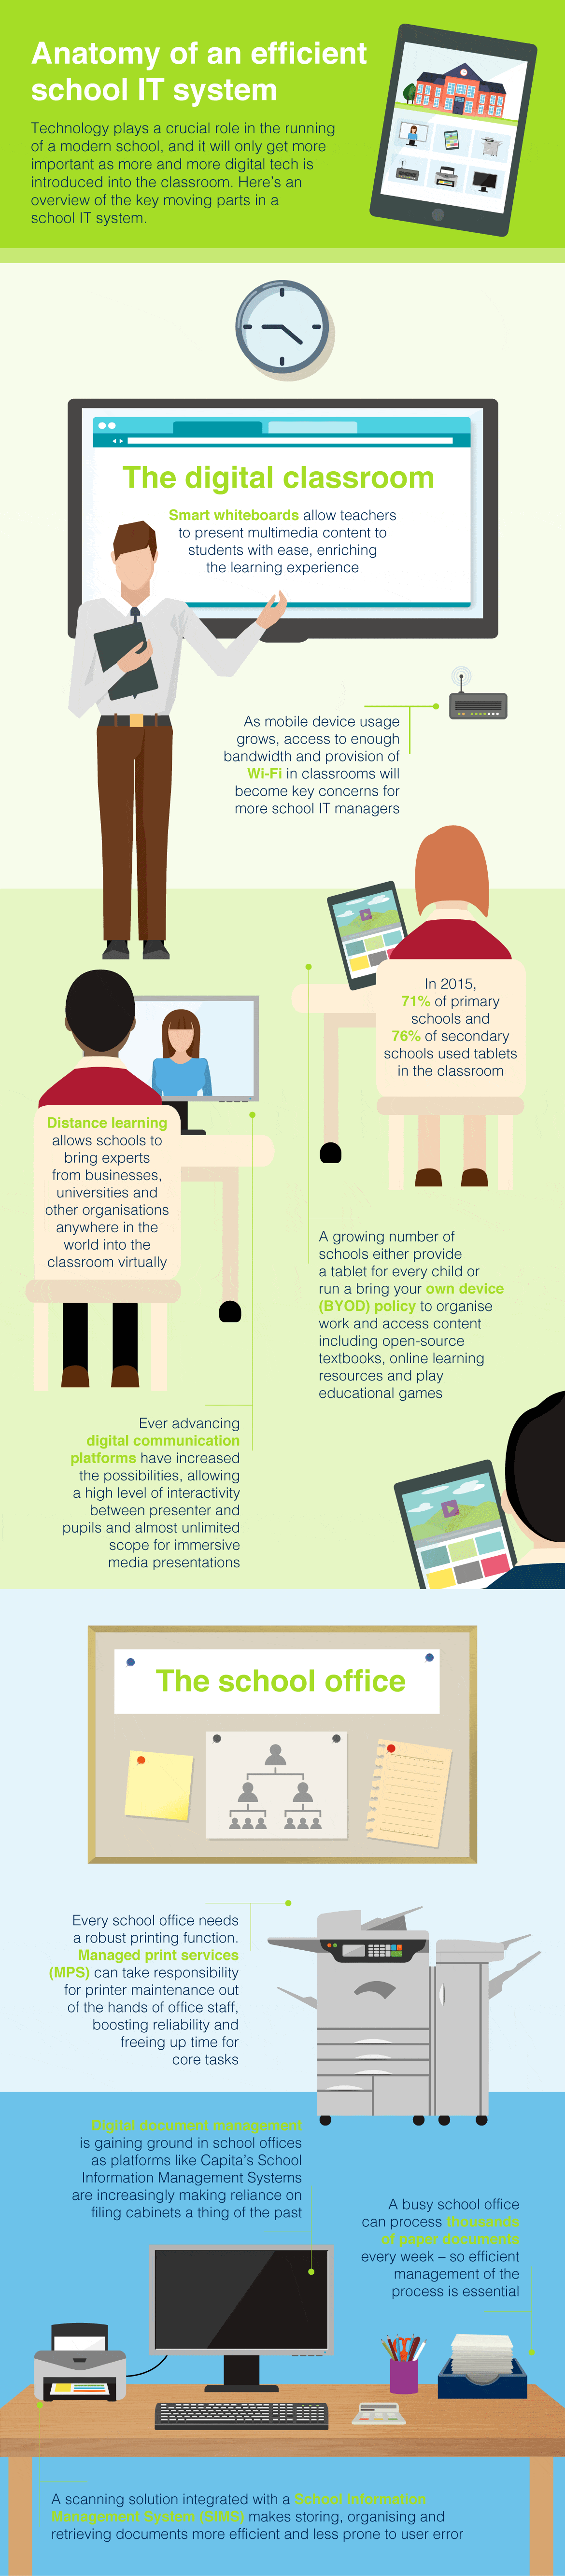 Anatomy of an Efficient School IT System Infographic